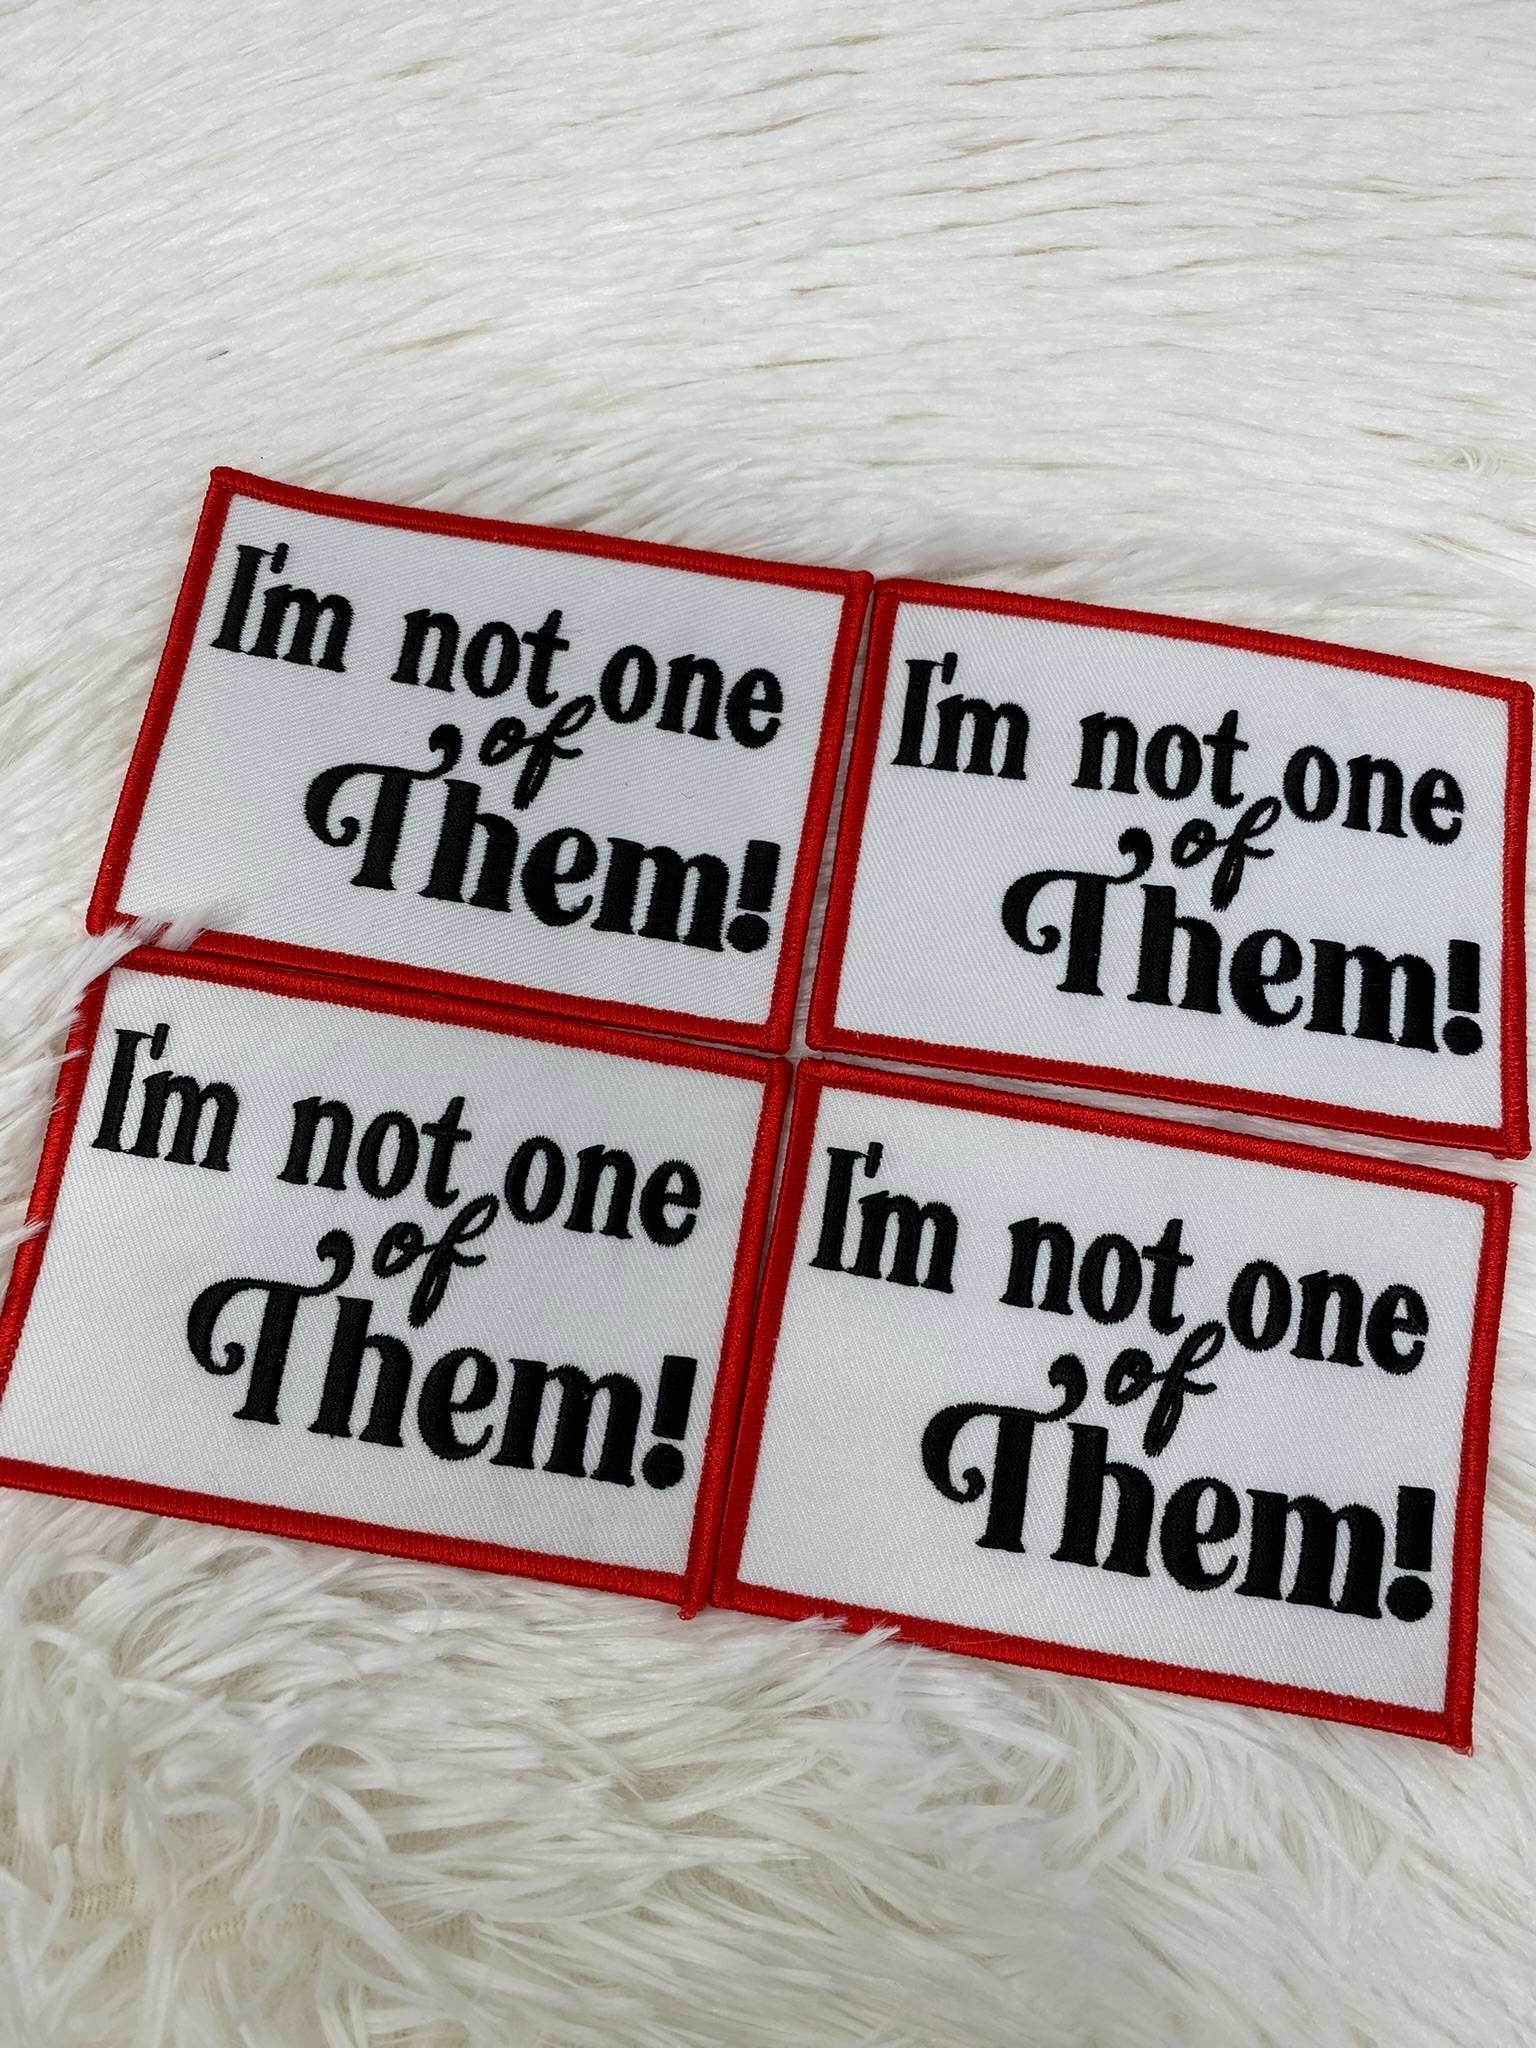 New Arrival,"I'm Not One of Them" Statement Patch, DIY Embroidered Applique Iron On Patch, Size 4"x3", Red Border, Statement Badge, 1-pc